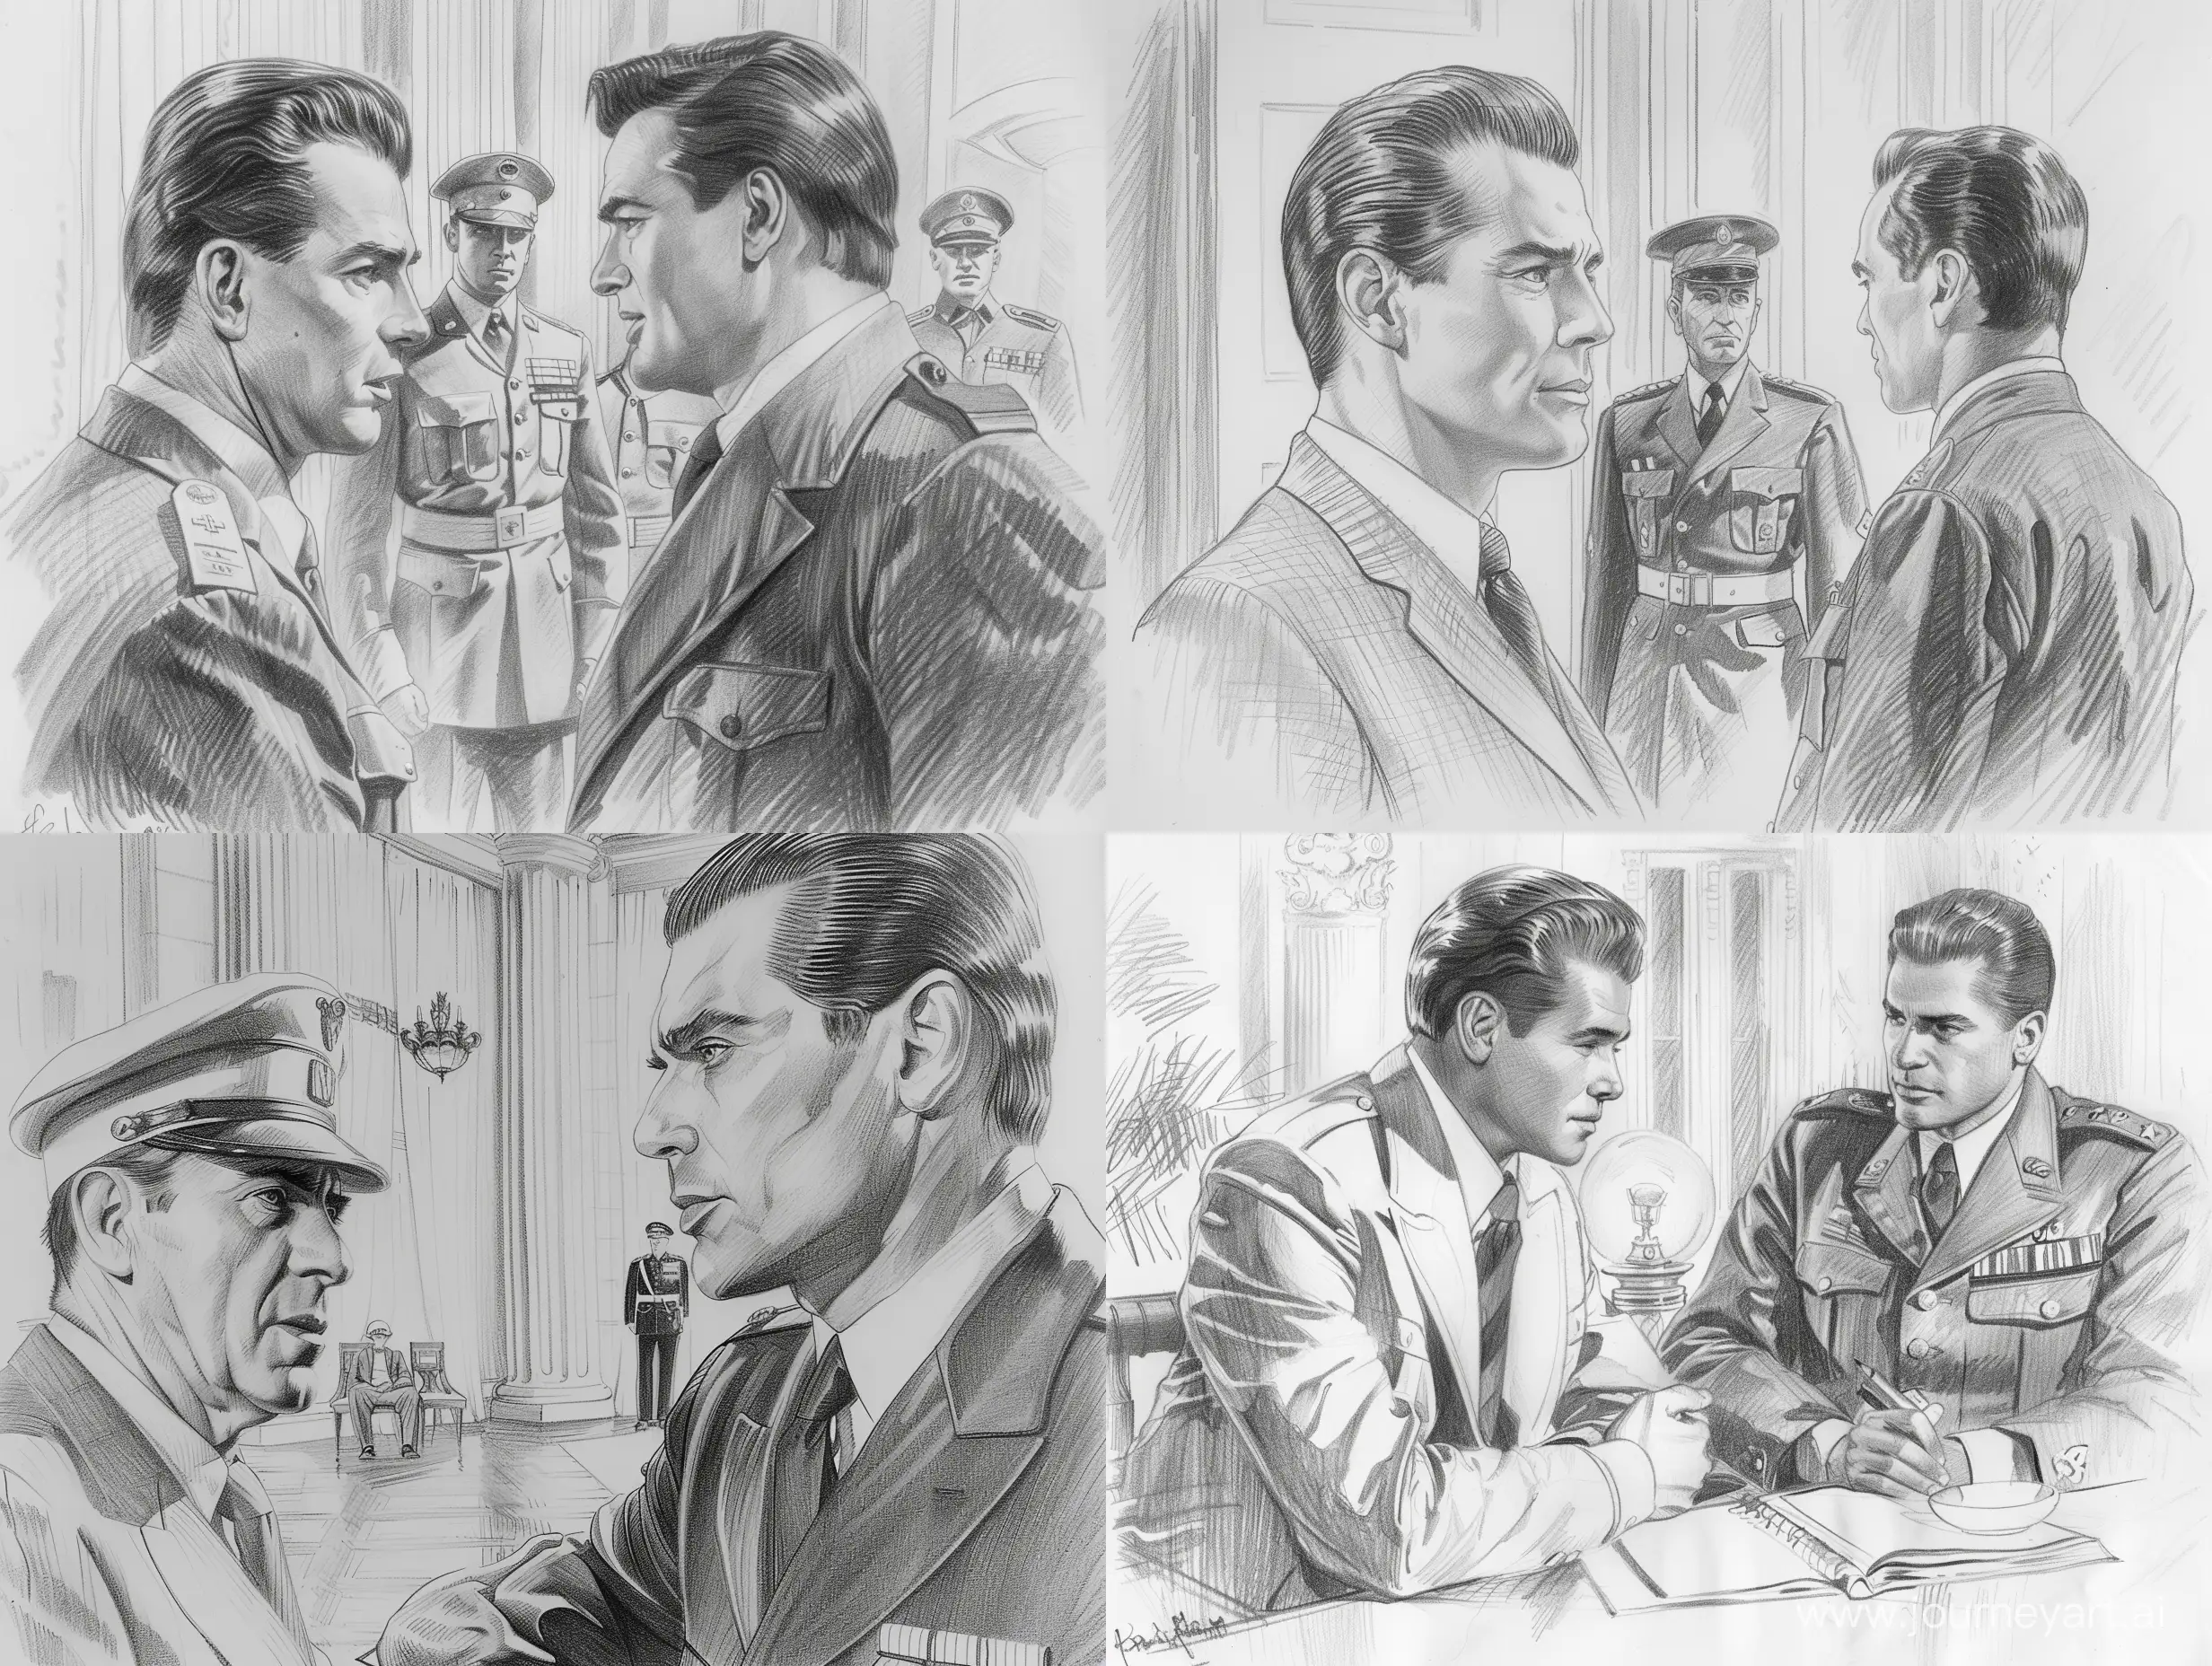 Pencil drawing of a glamorous 1940s handsome movie star man with slicked-back hair, meeting with a 1940s Argentine Peronist generel in uniform, Buenos Aires mayoralty interior